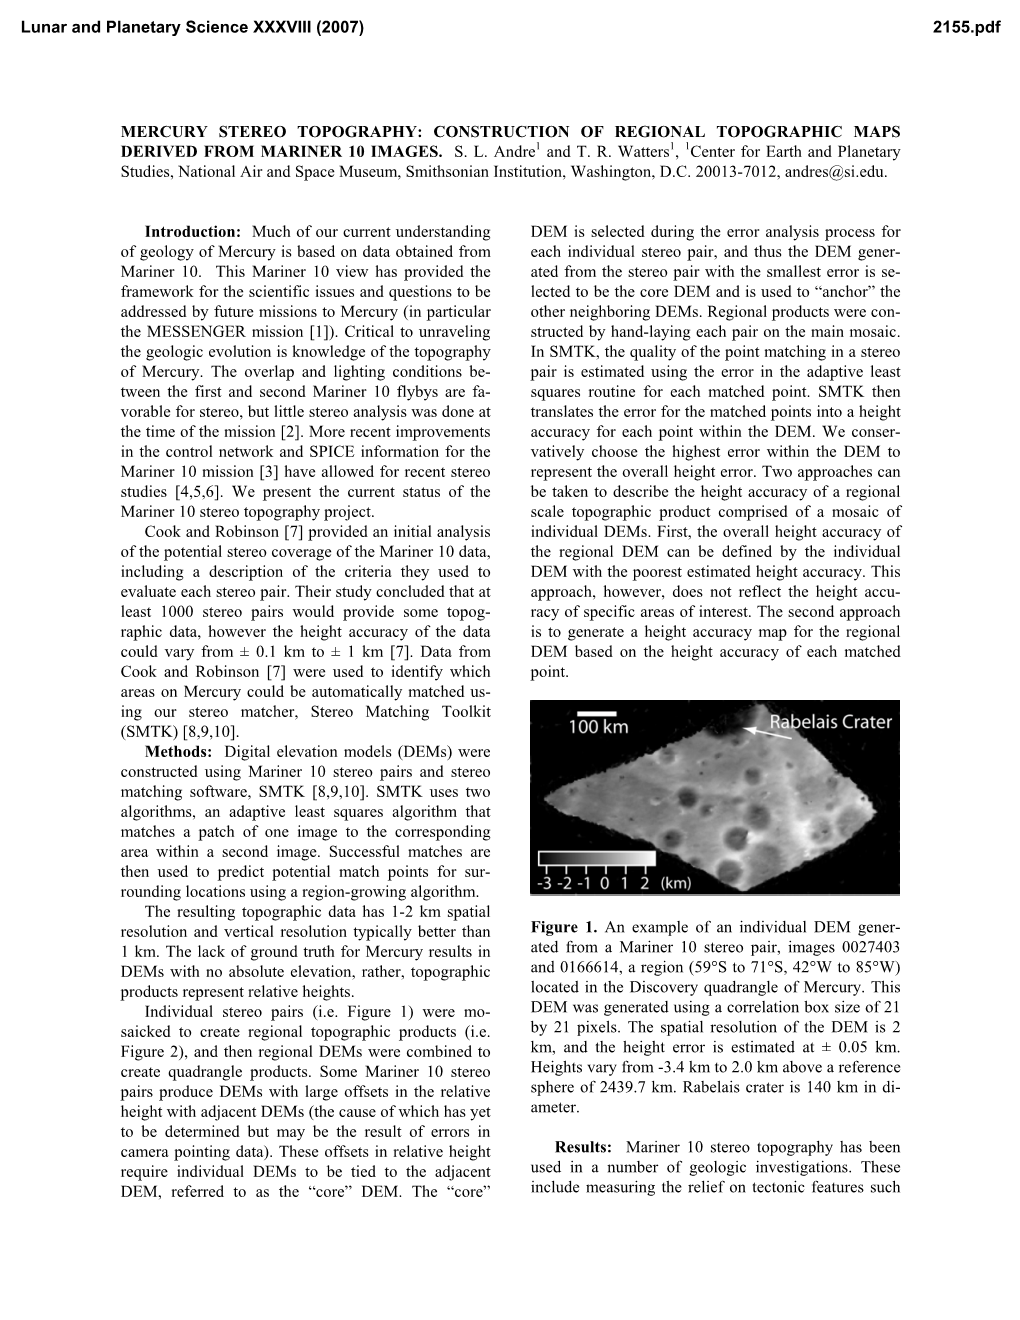 Mercury Stereo Topography: Construction of Regional Topographic Maps Derived from Mariner 10 Images